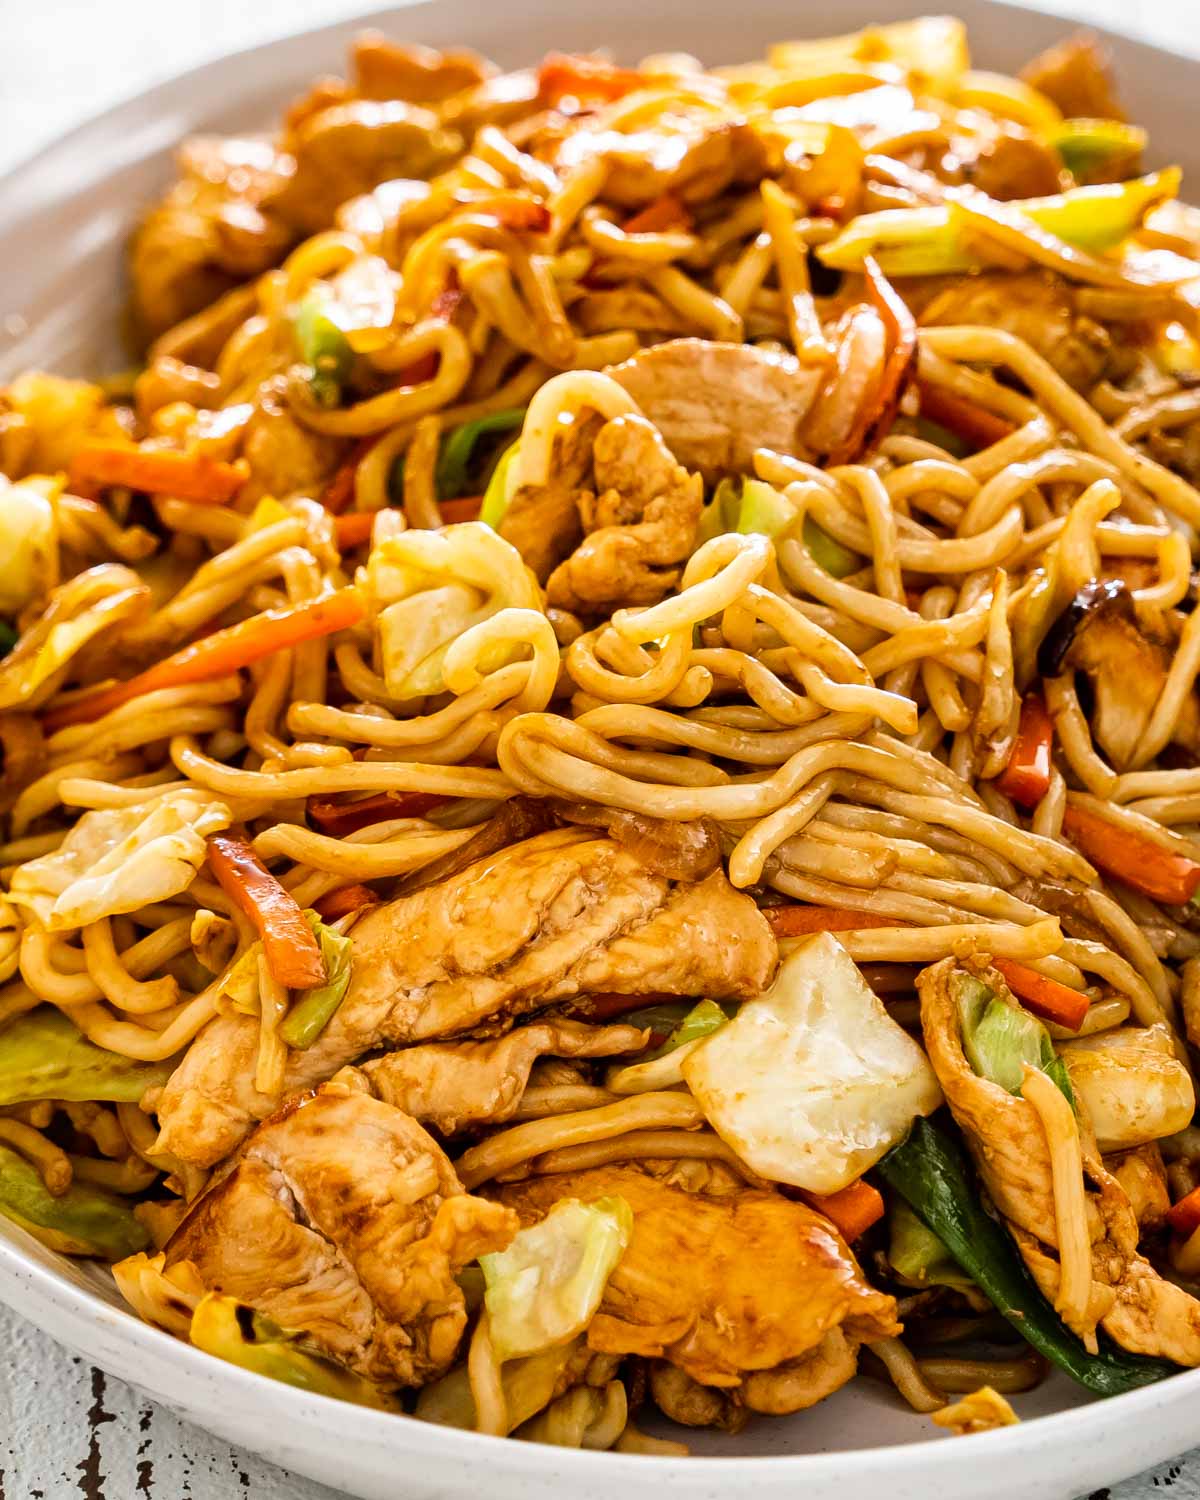 yakisoba noodles with chicken and vegetables in a large serving platter.